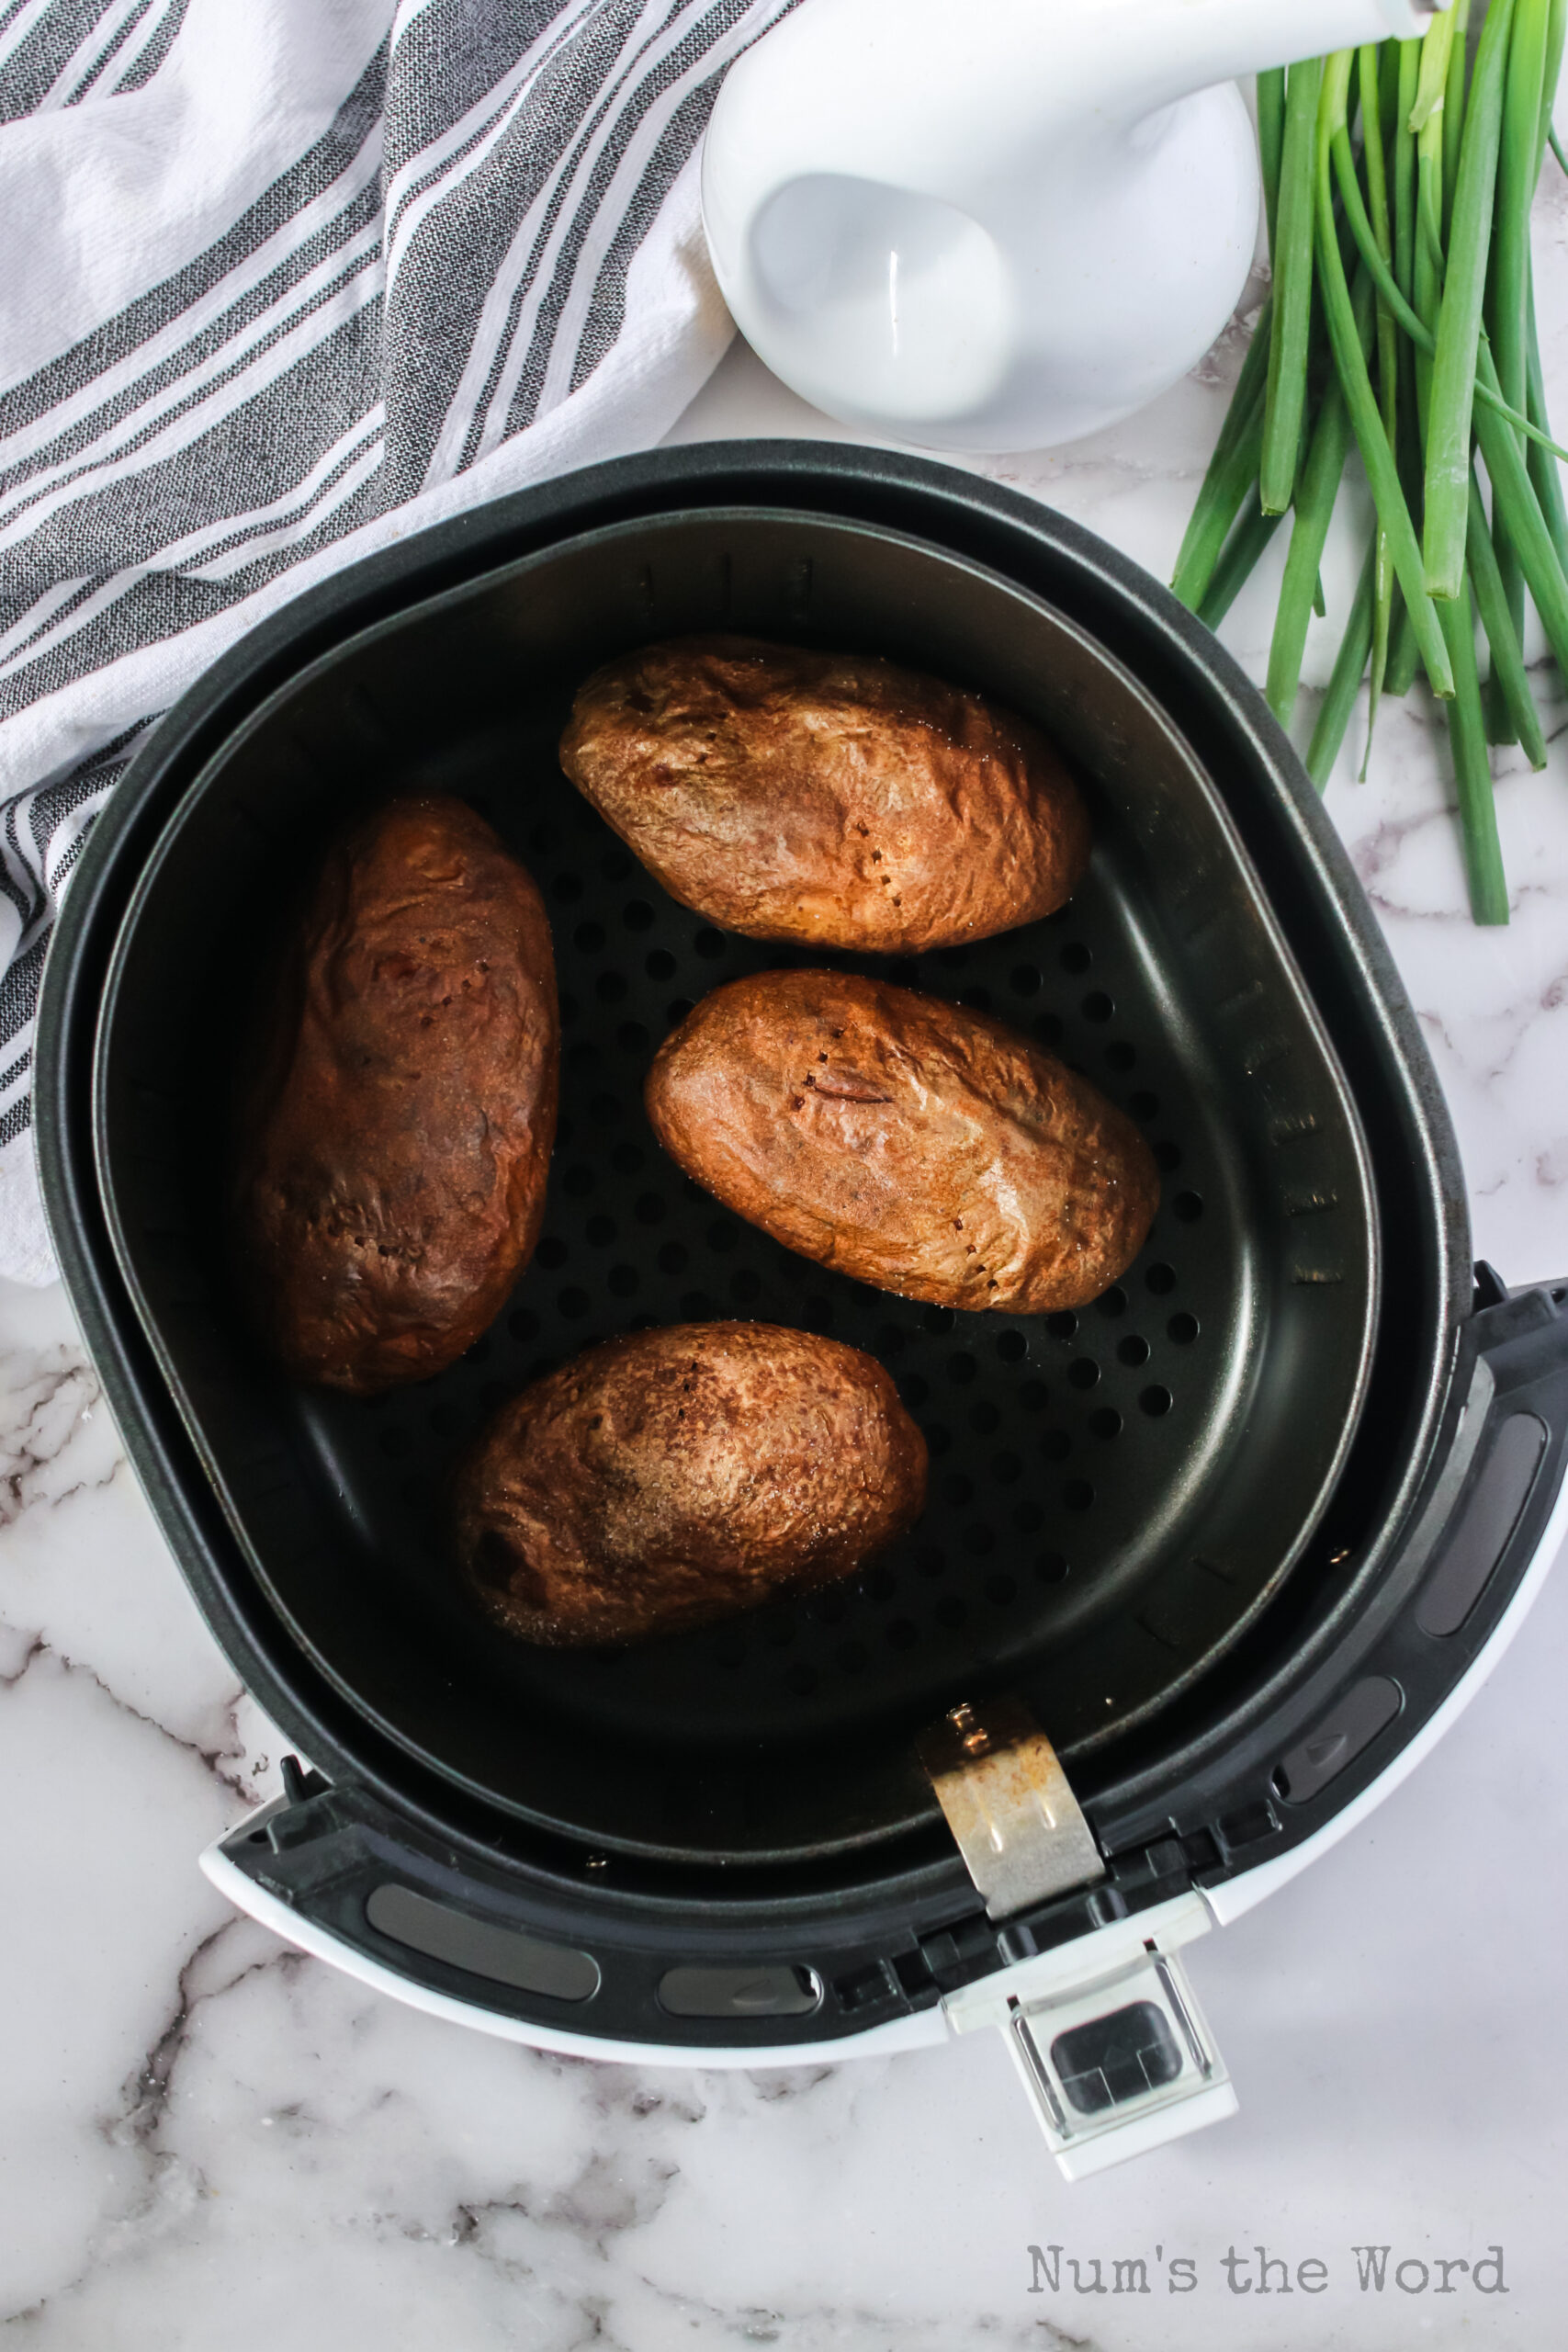 baked potatoes in air fryer ready to fill and serve